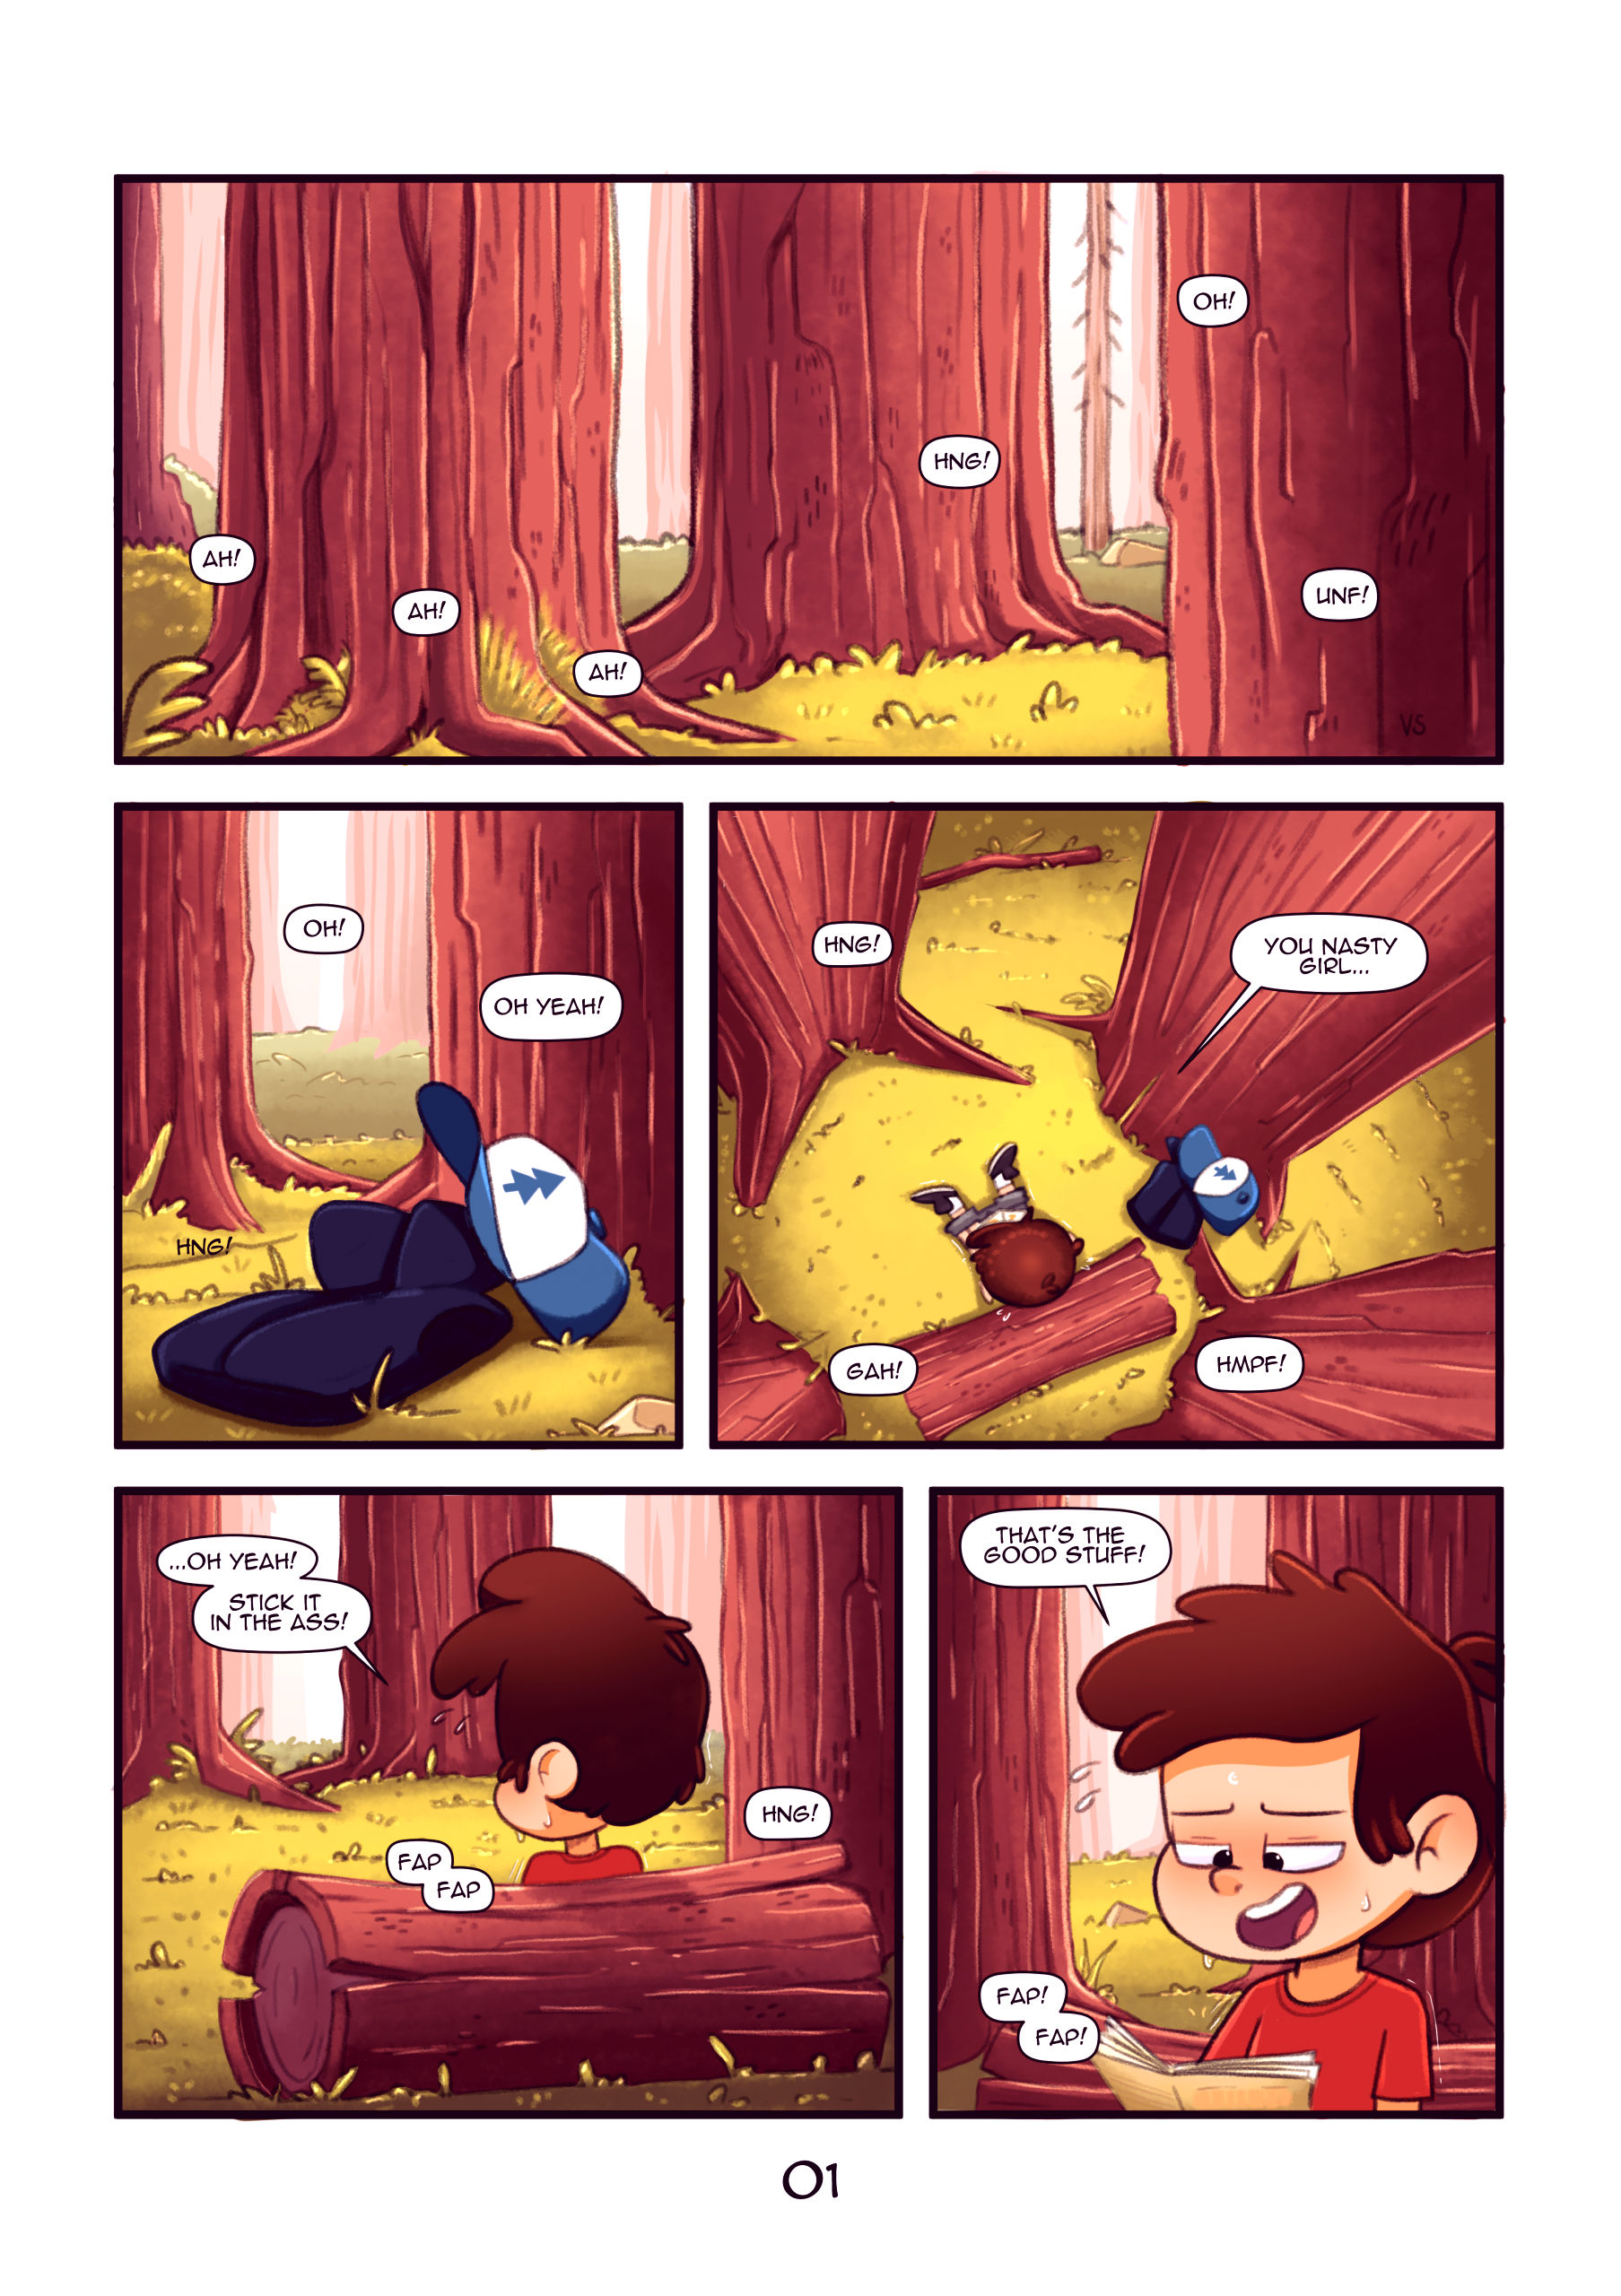 Secret of the woods porn comic picture 2